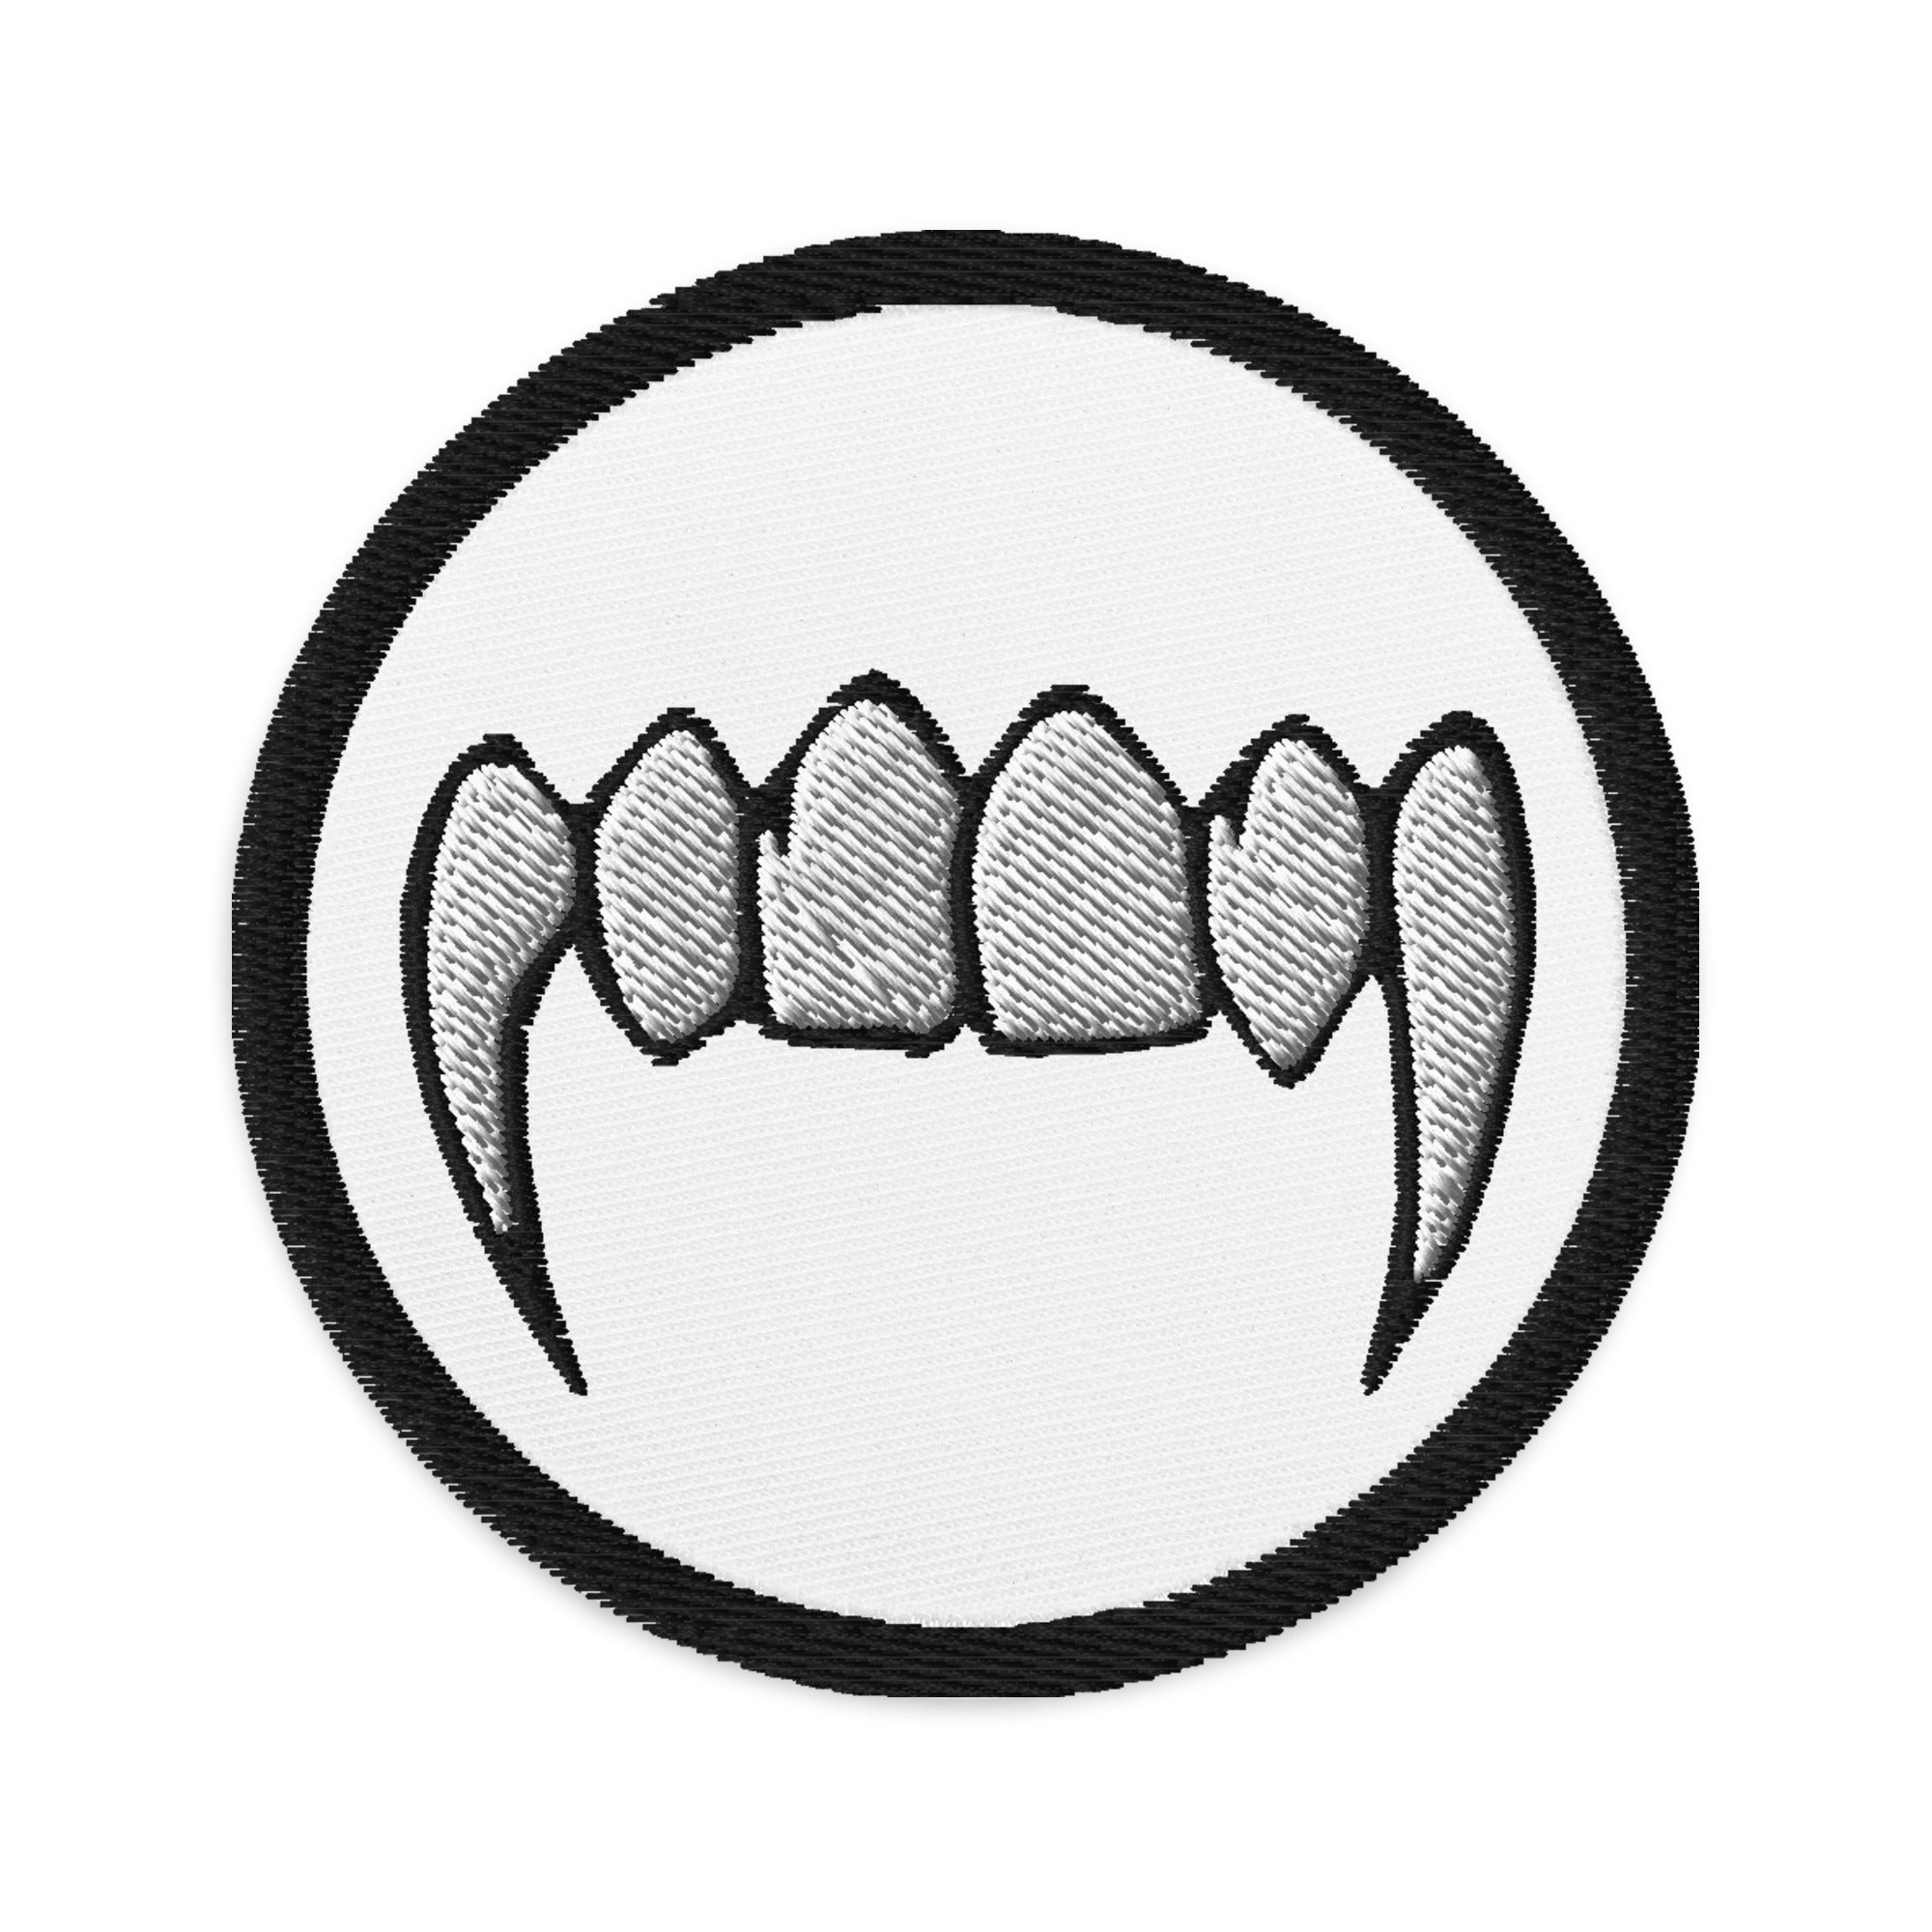 Vampire Fangs Embroidered Patch Bram Stoker's Dracula Teeth - Edge of Life Designs